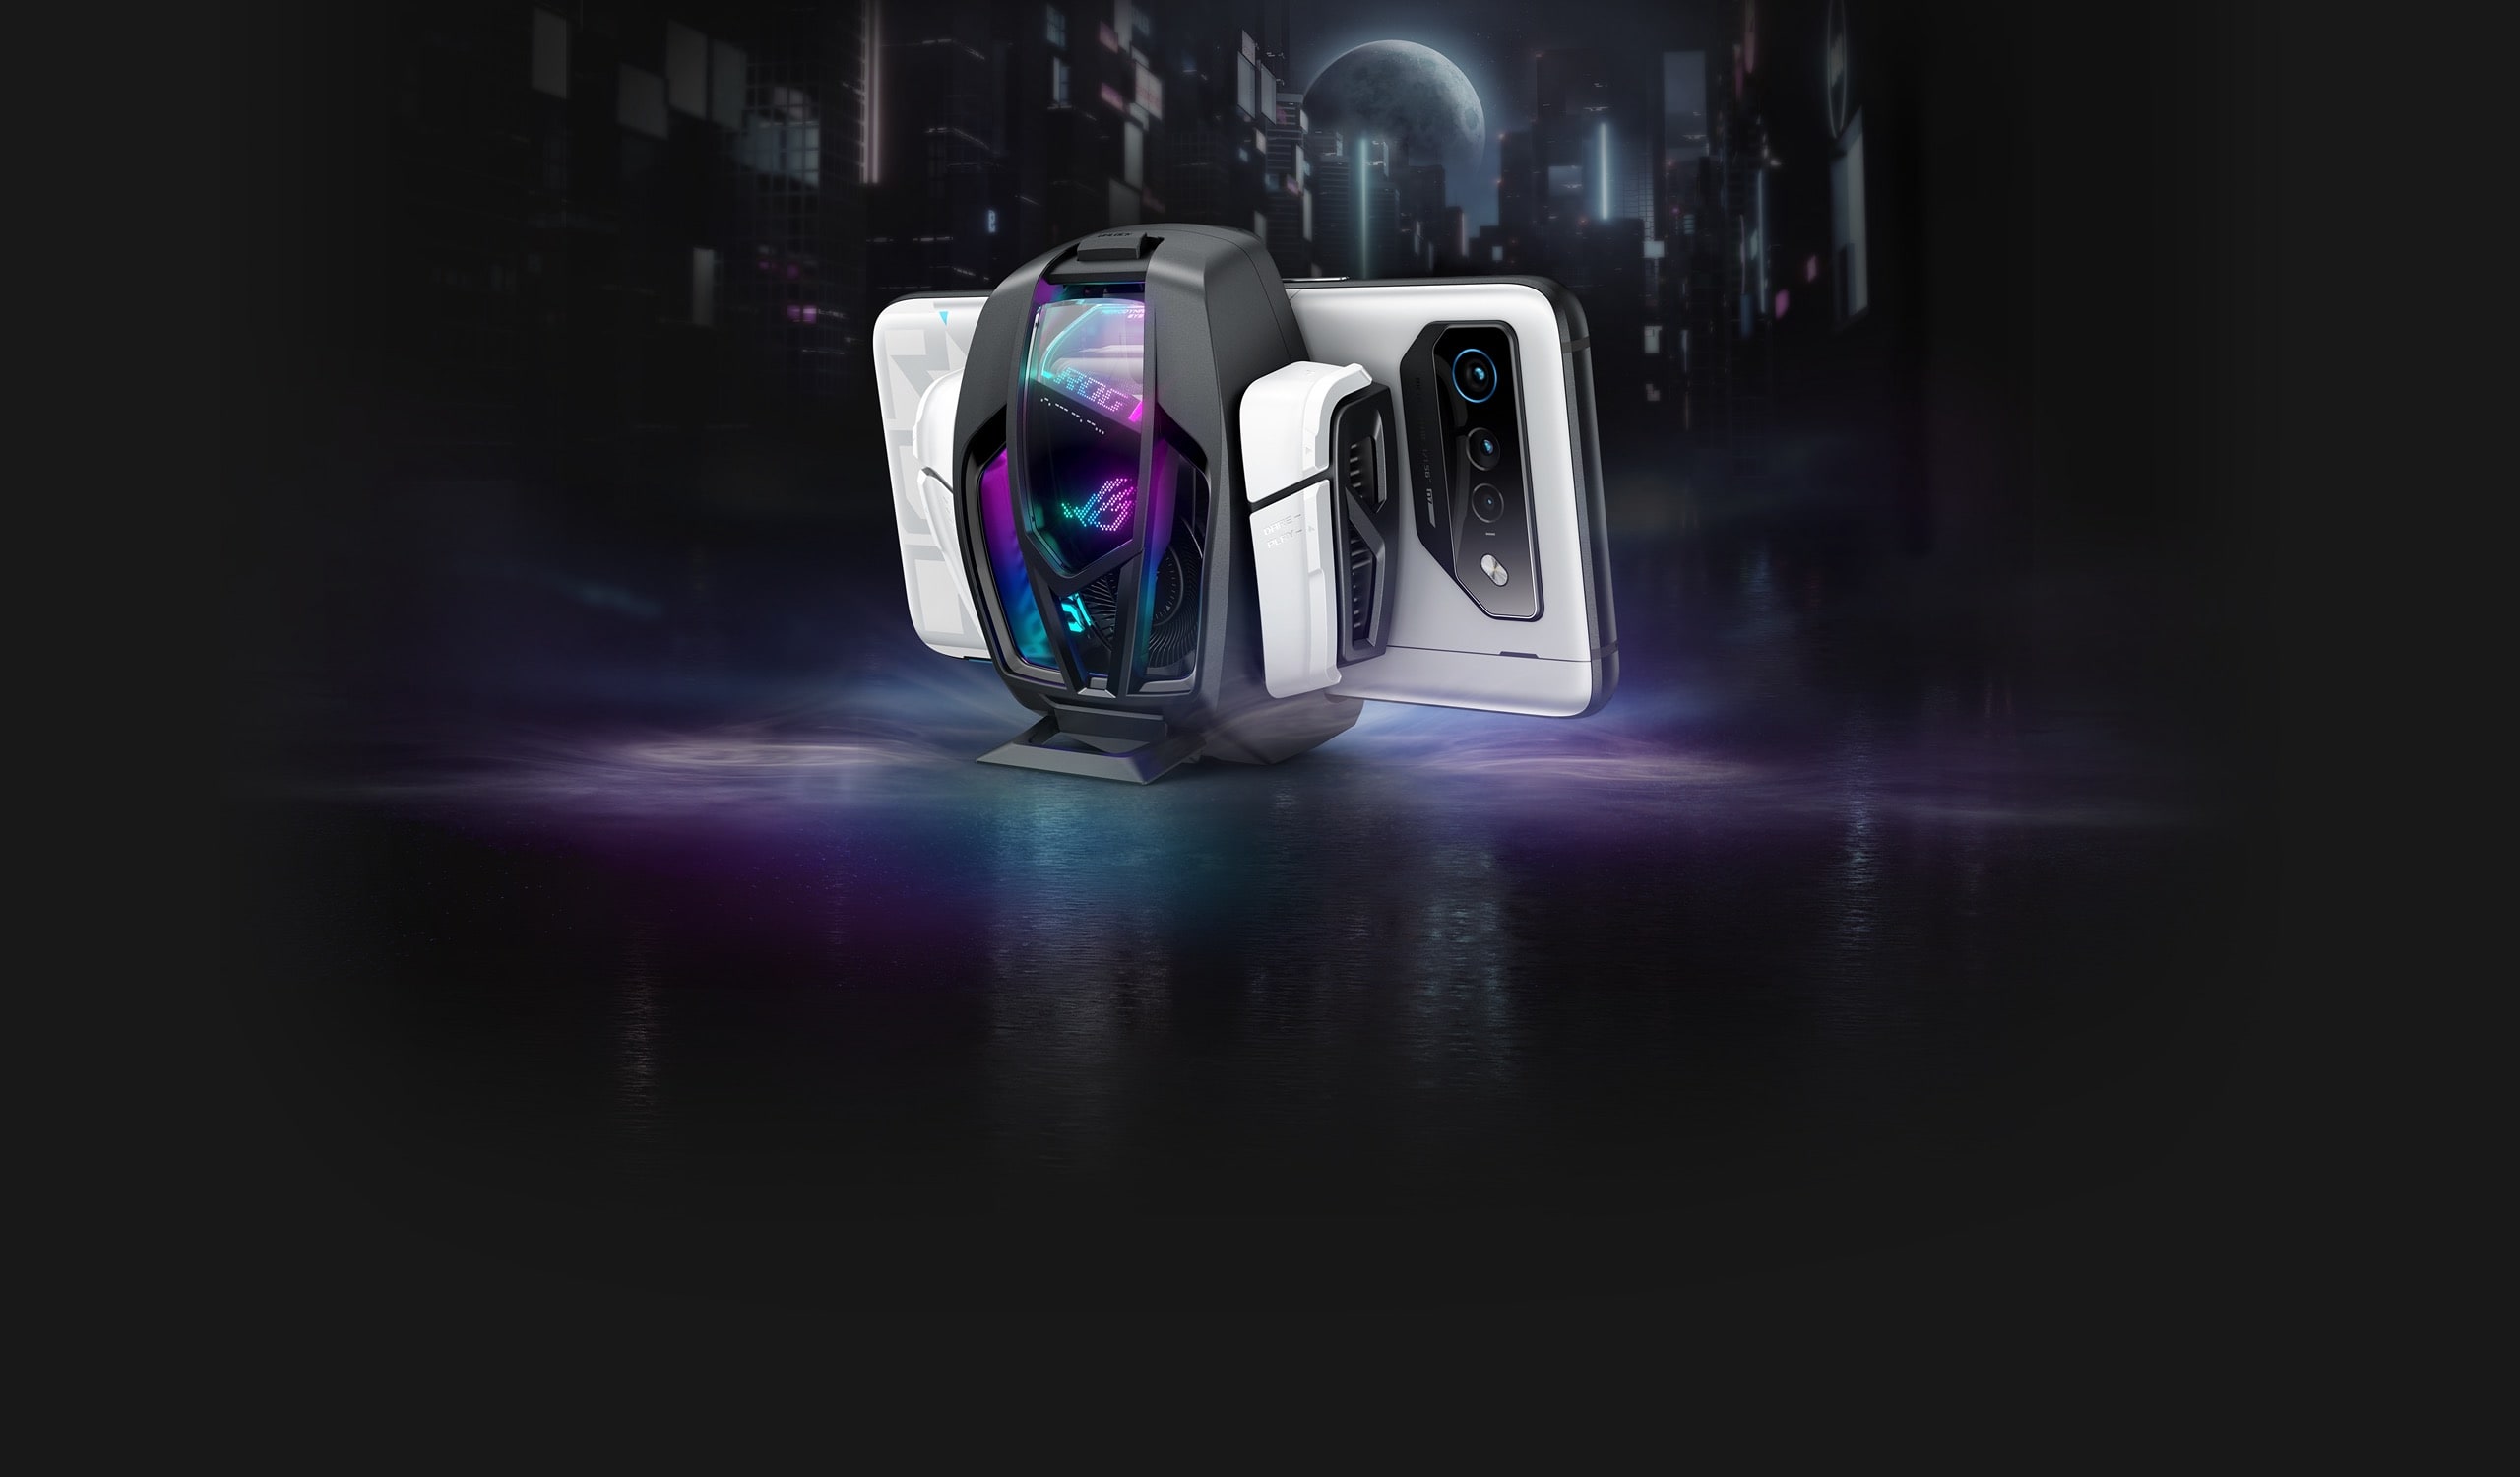 ROG AeroActive Cooler 7 and ROG Phone 7 with a cyberpunk city as background.